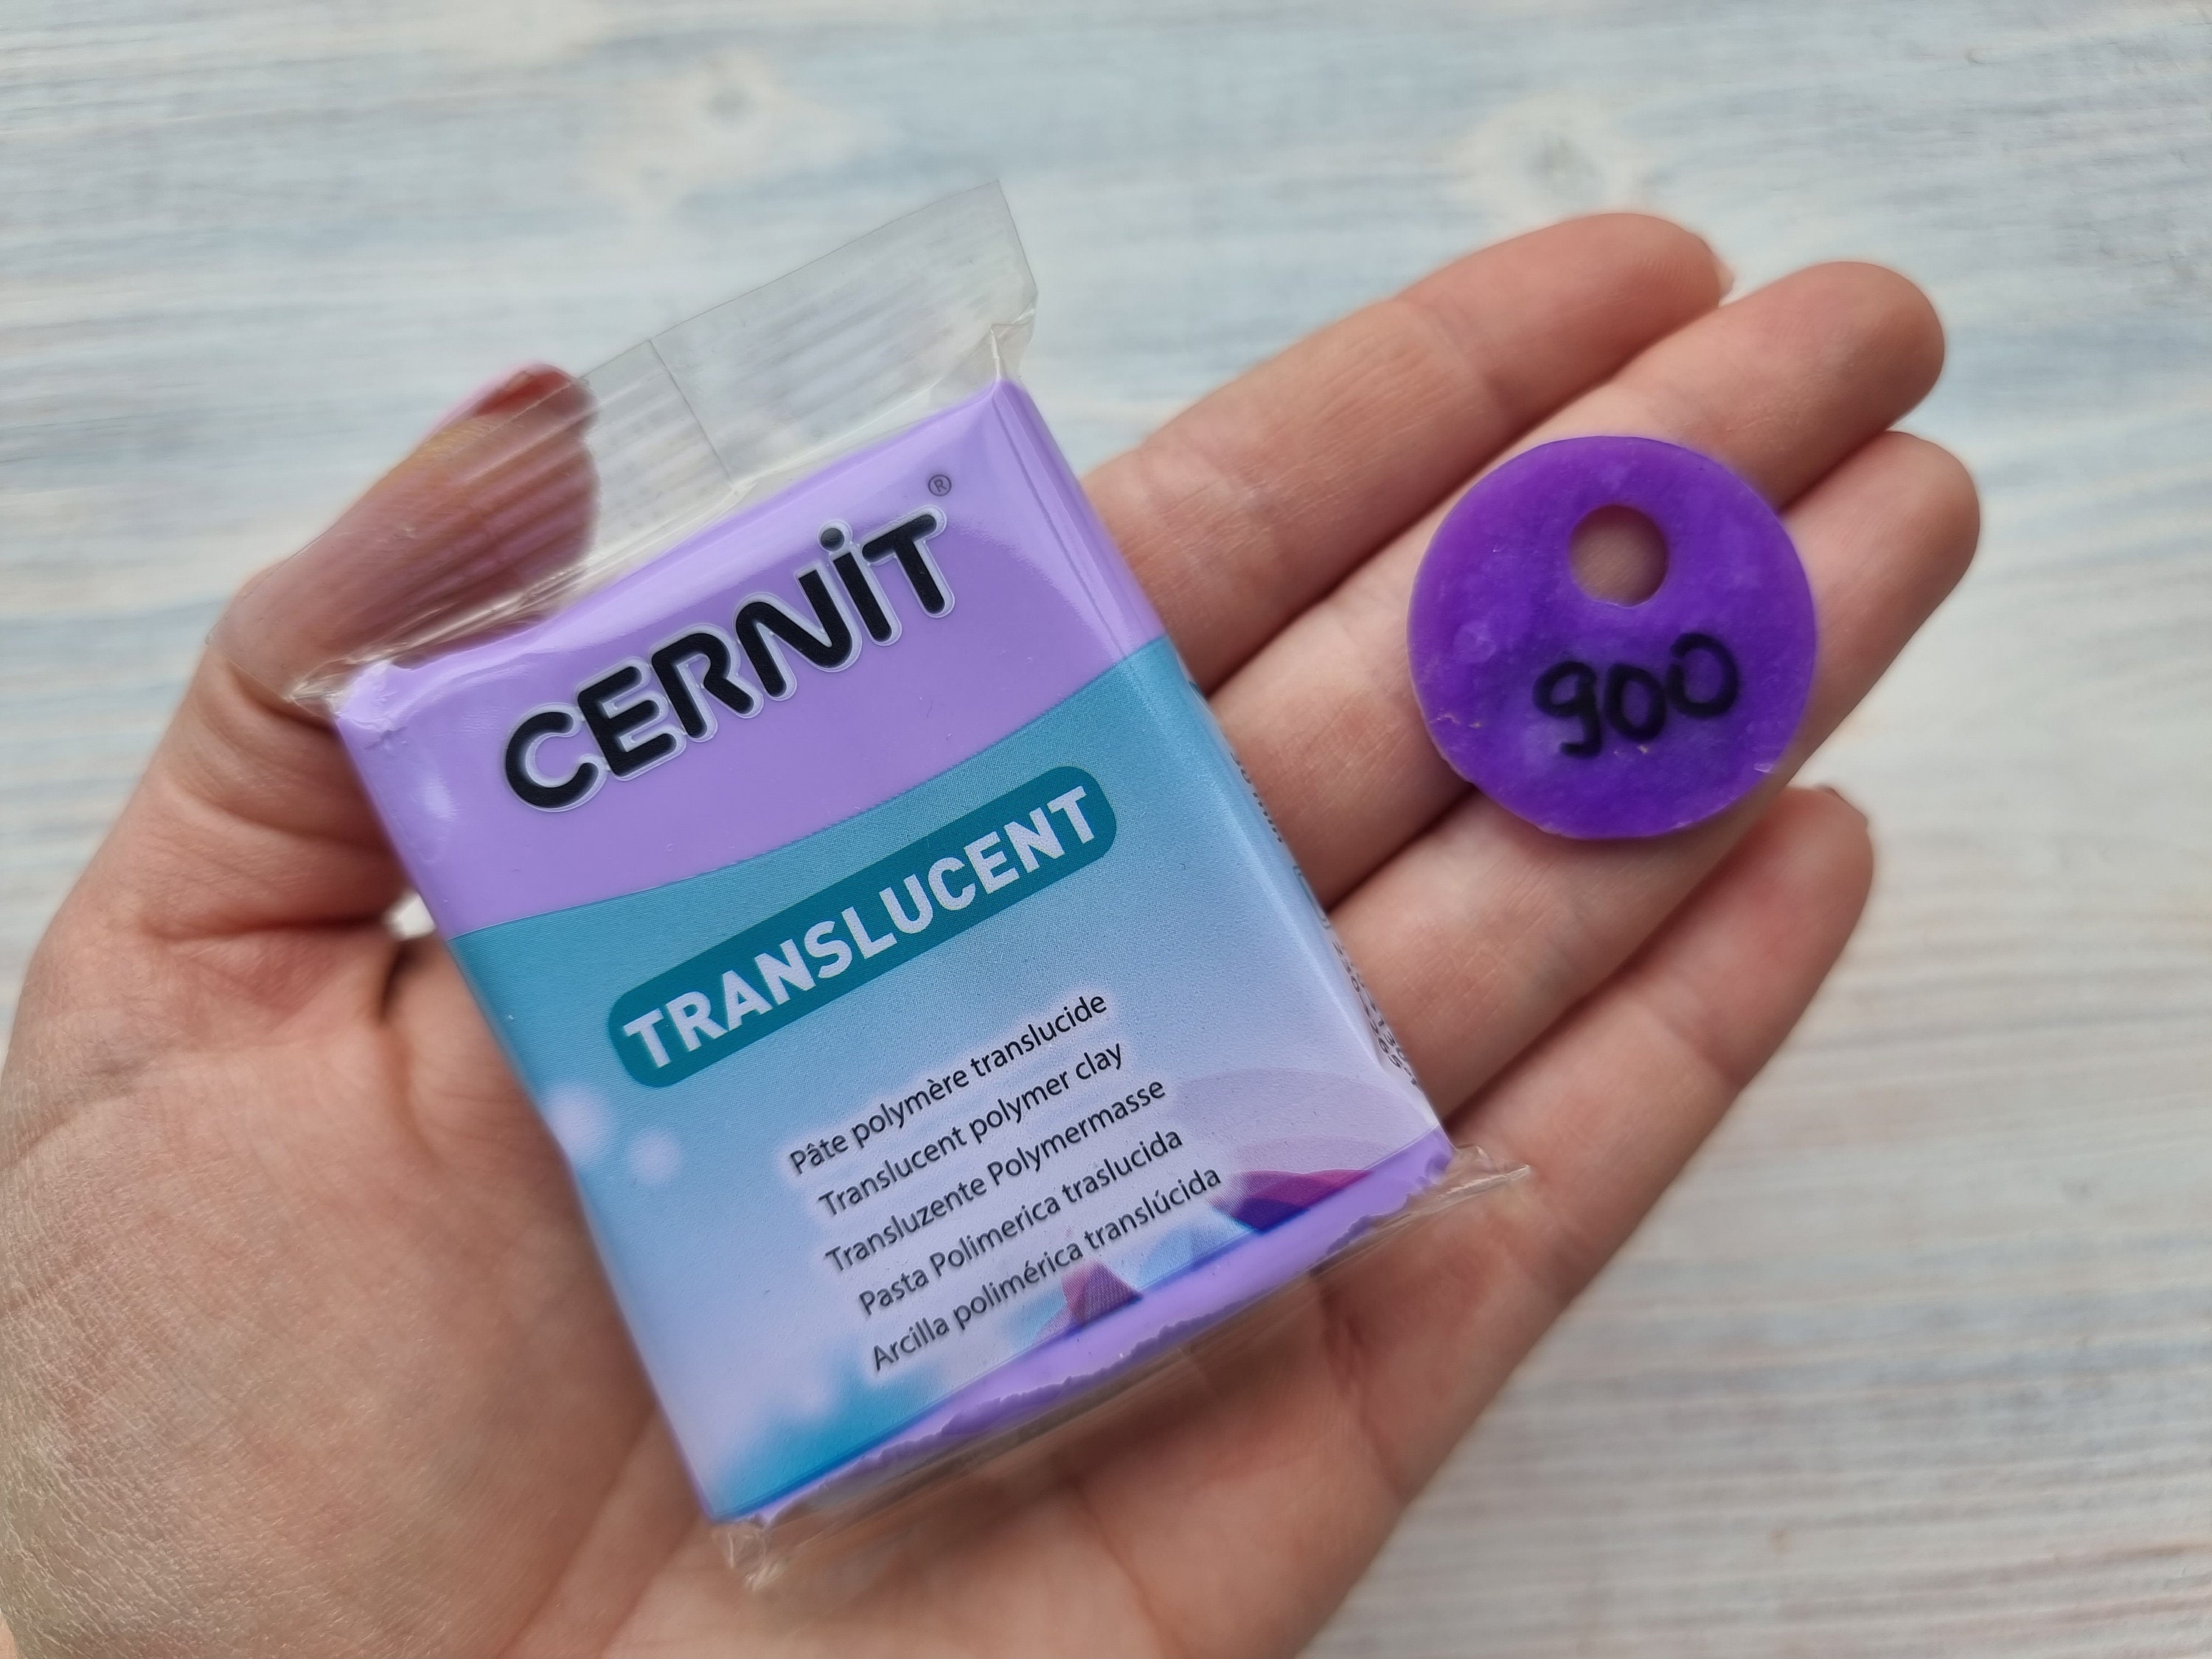 CERNIT Translucent Serie Polymer Clay, Glitter Gold, Nr. 050, Polymer Clay,  56g 2oz, Oven-hardening Polymer Modeling Clay -  Israel